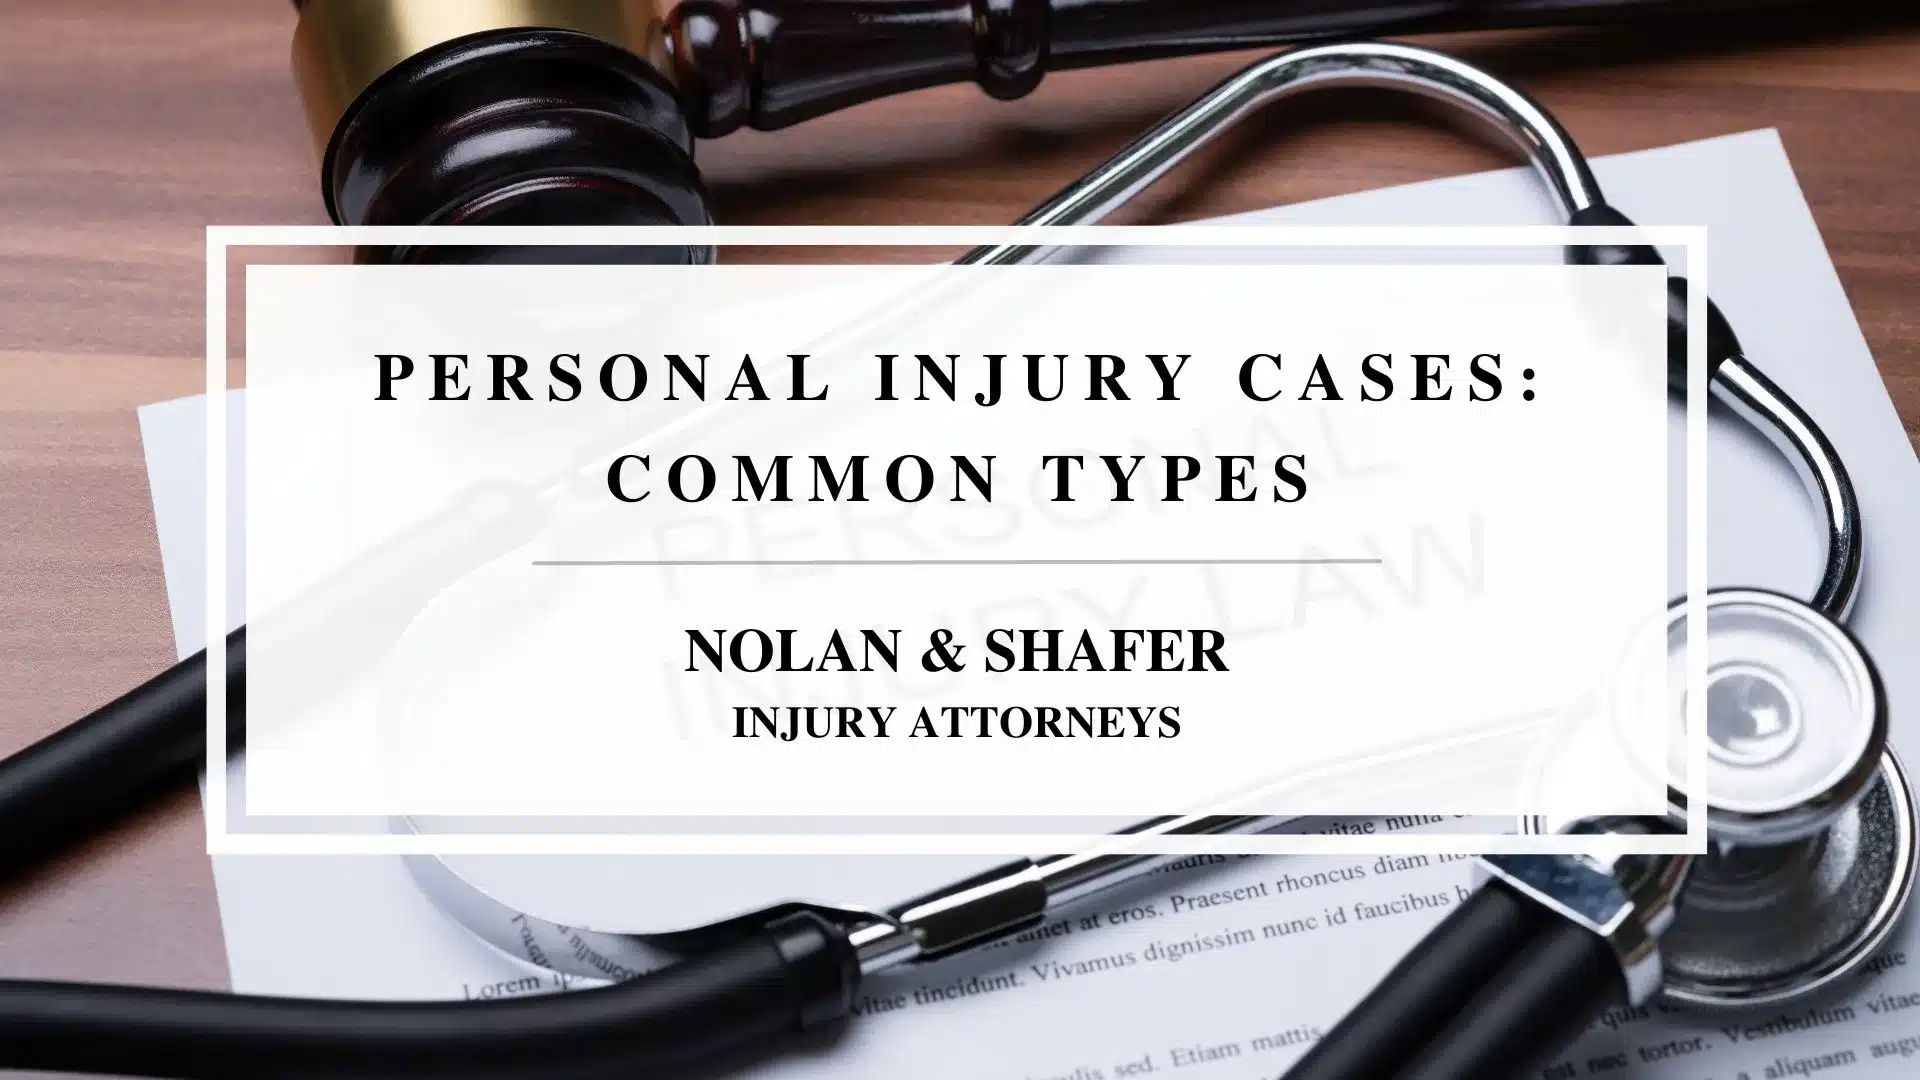 Featured image of common types of personal injury cases